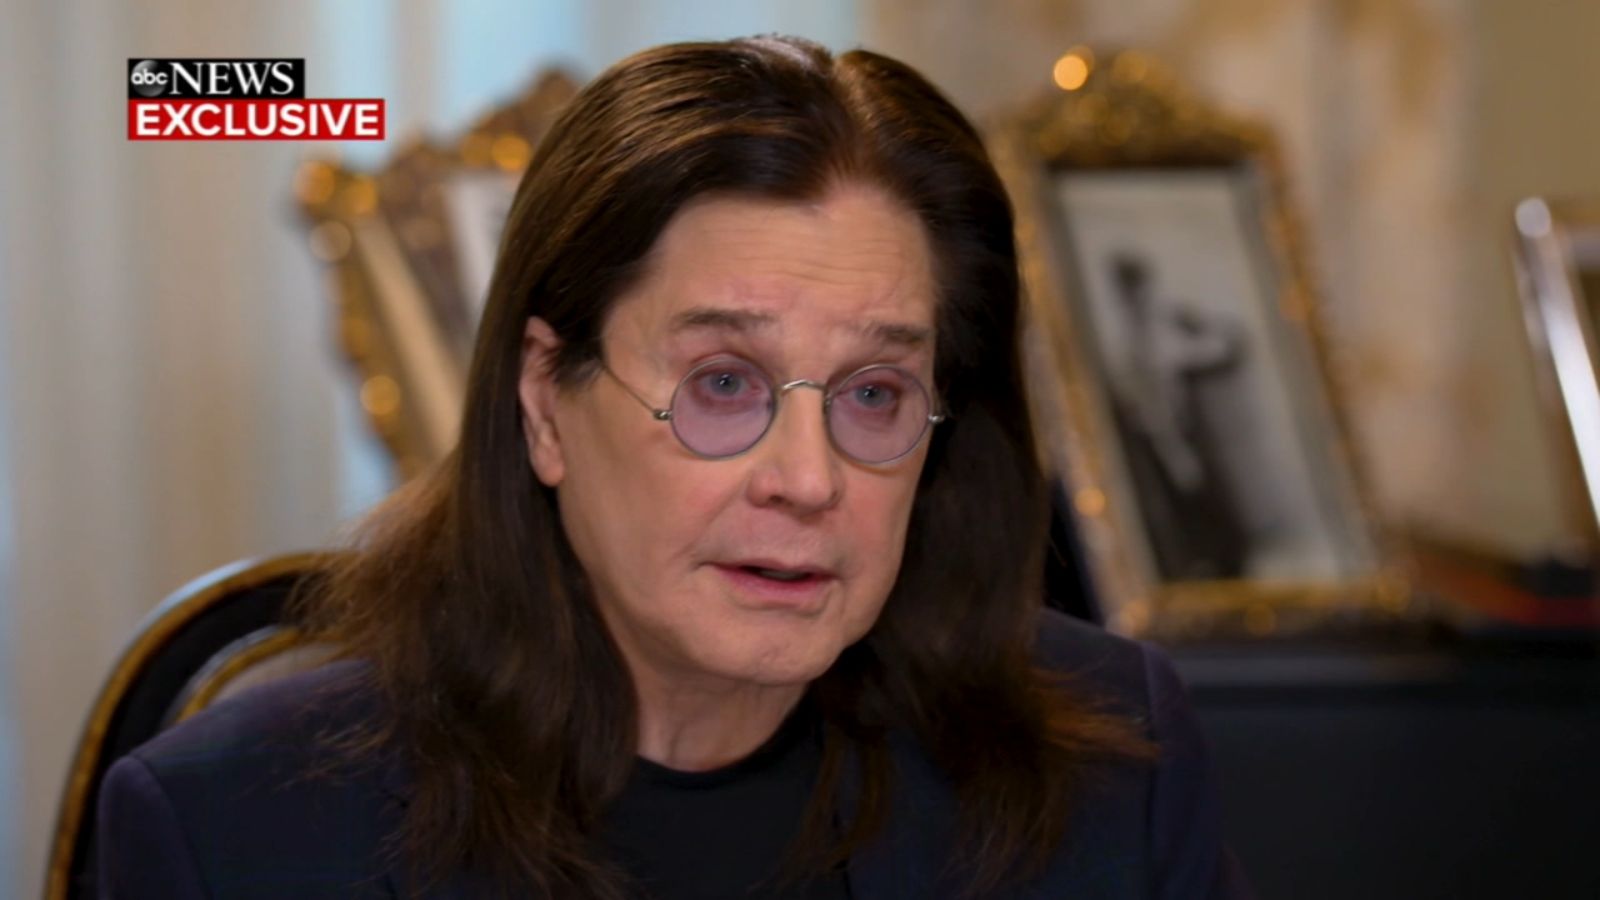 Ozzy Osbourne opens up about battle with Parkinson's disease